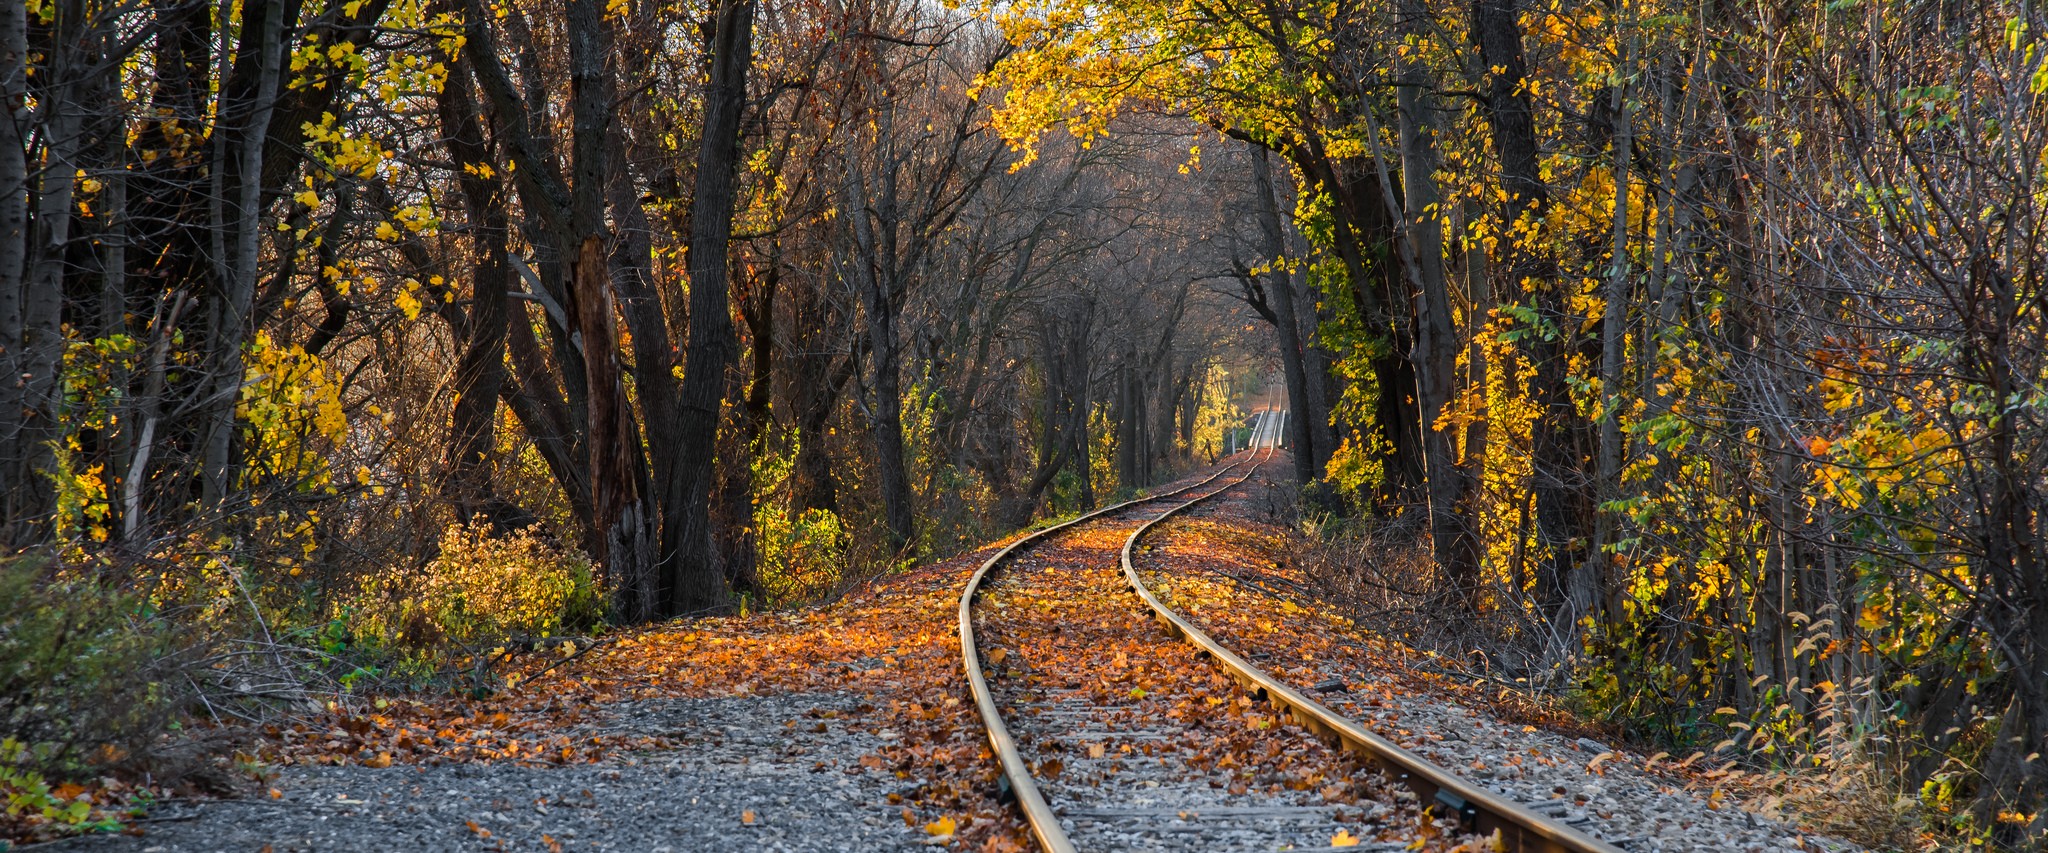 General 2048x853 railway forest fall nature fallen leaves outdoors trees